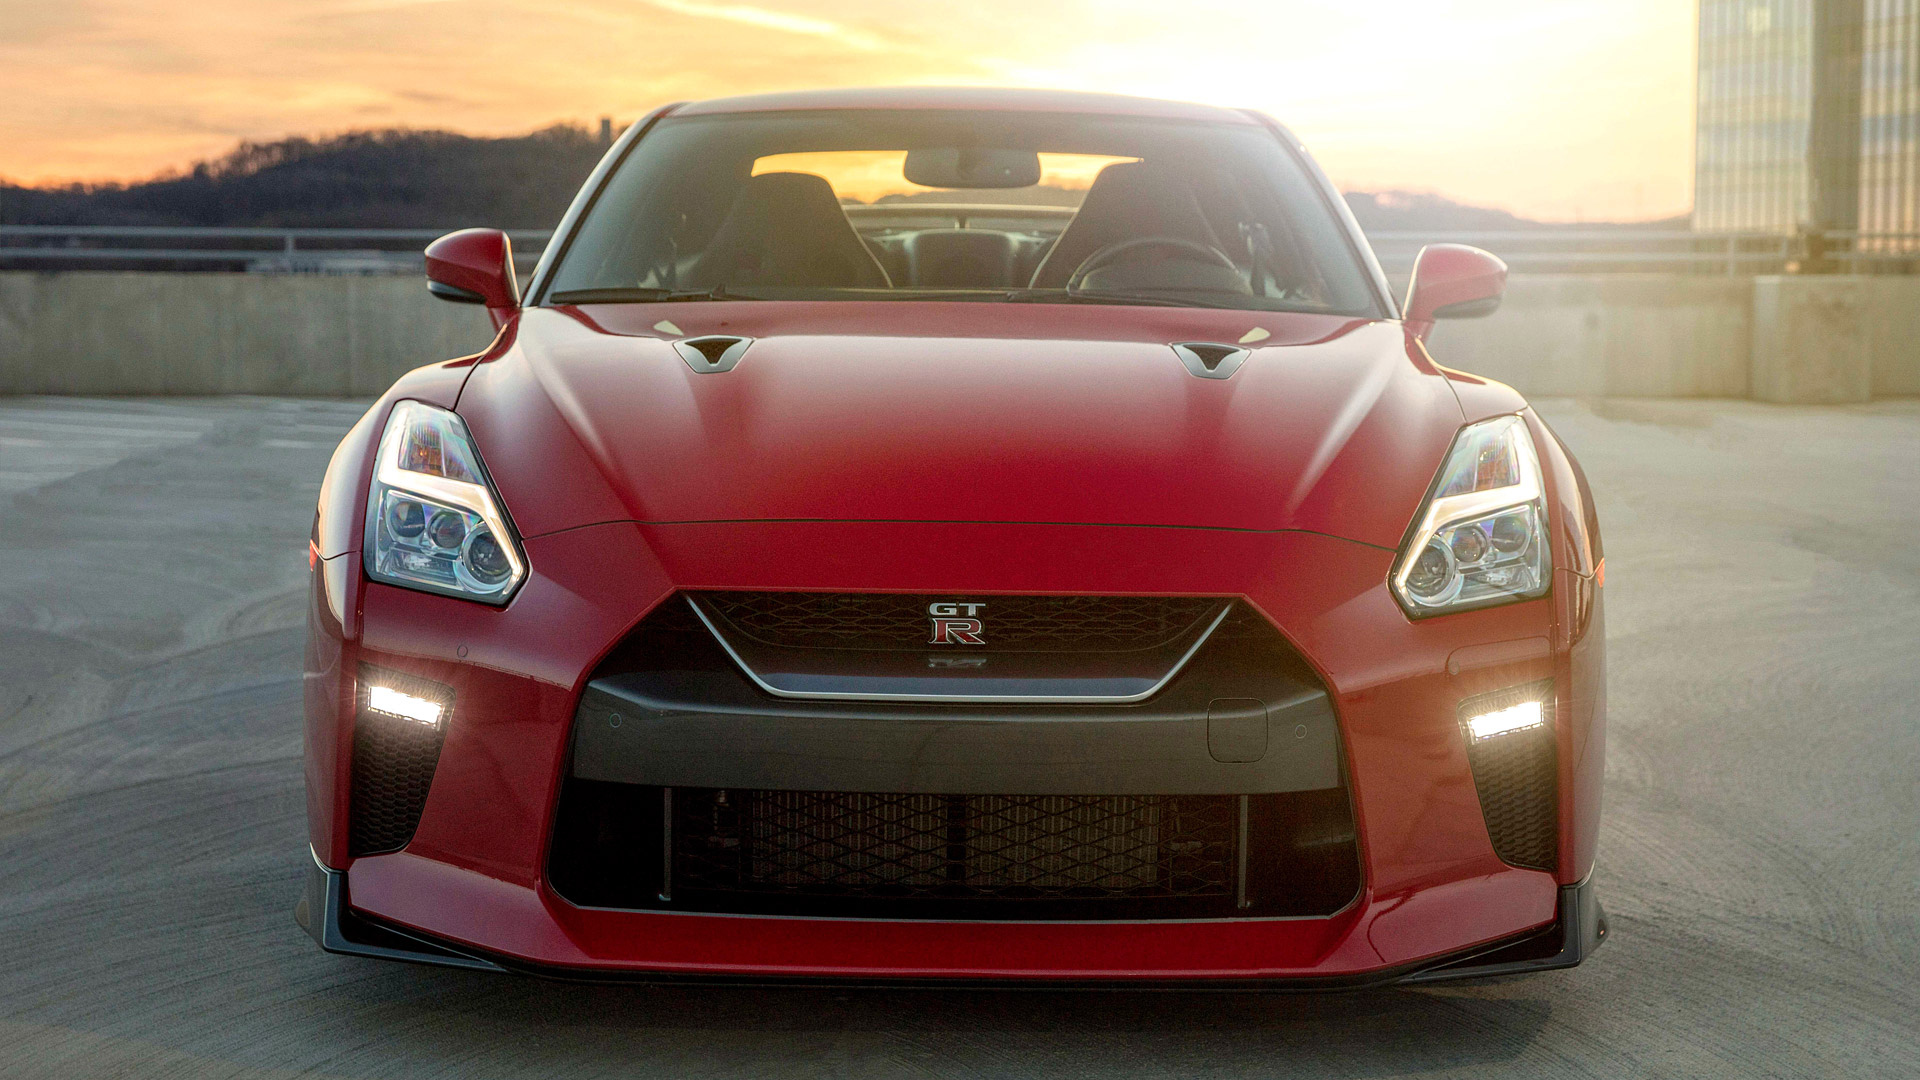 Red Nissan GTR Front View Wallpaper 71687 1920x1080px